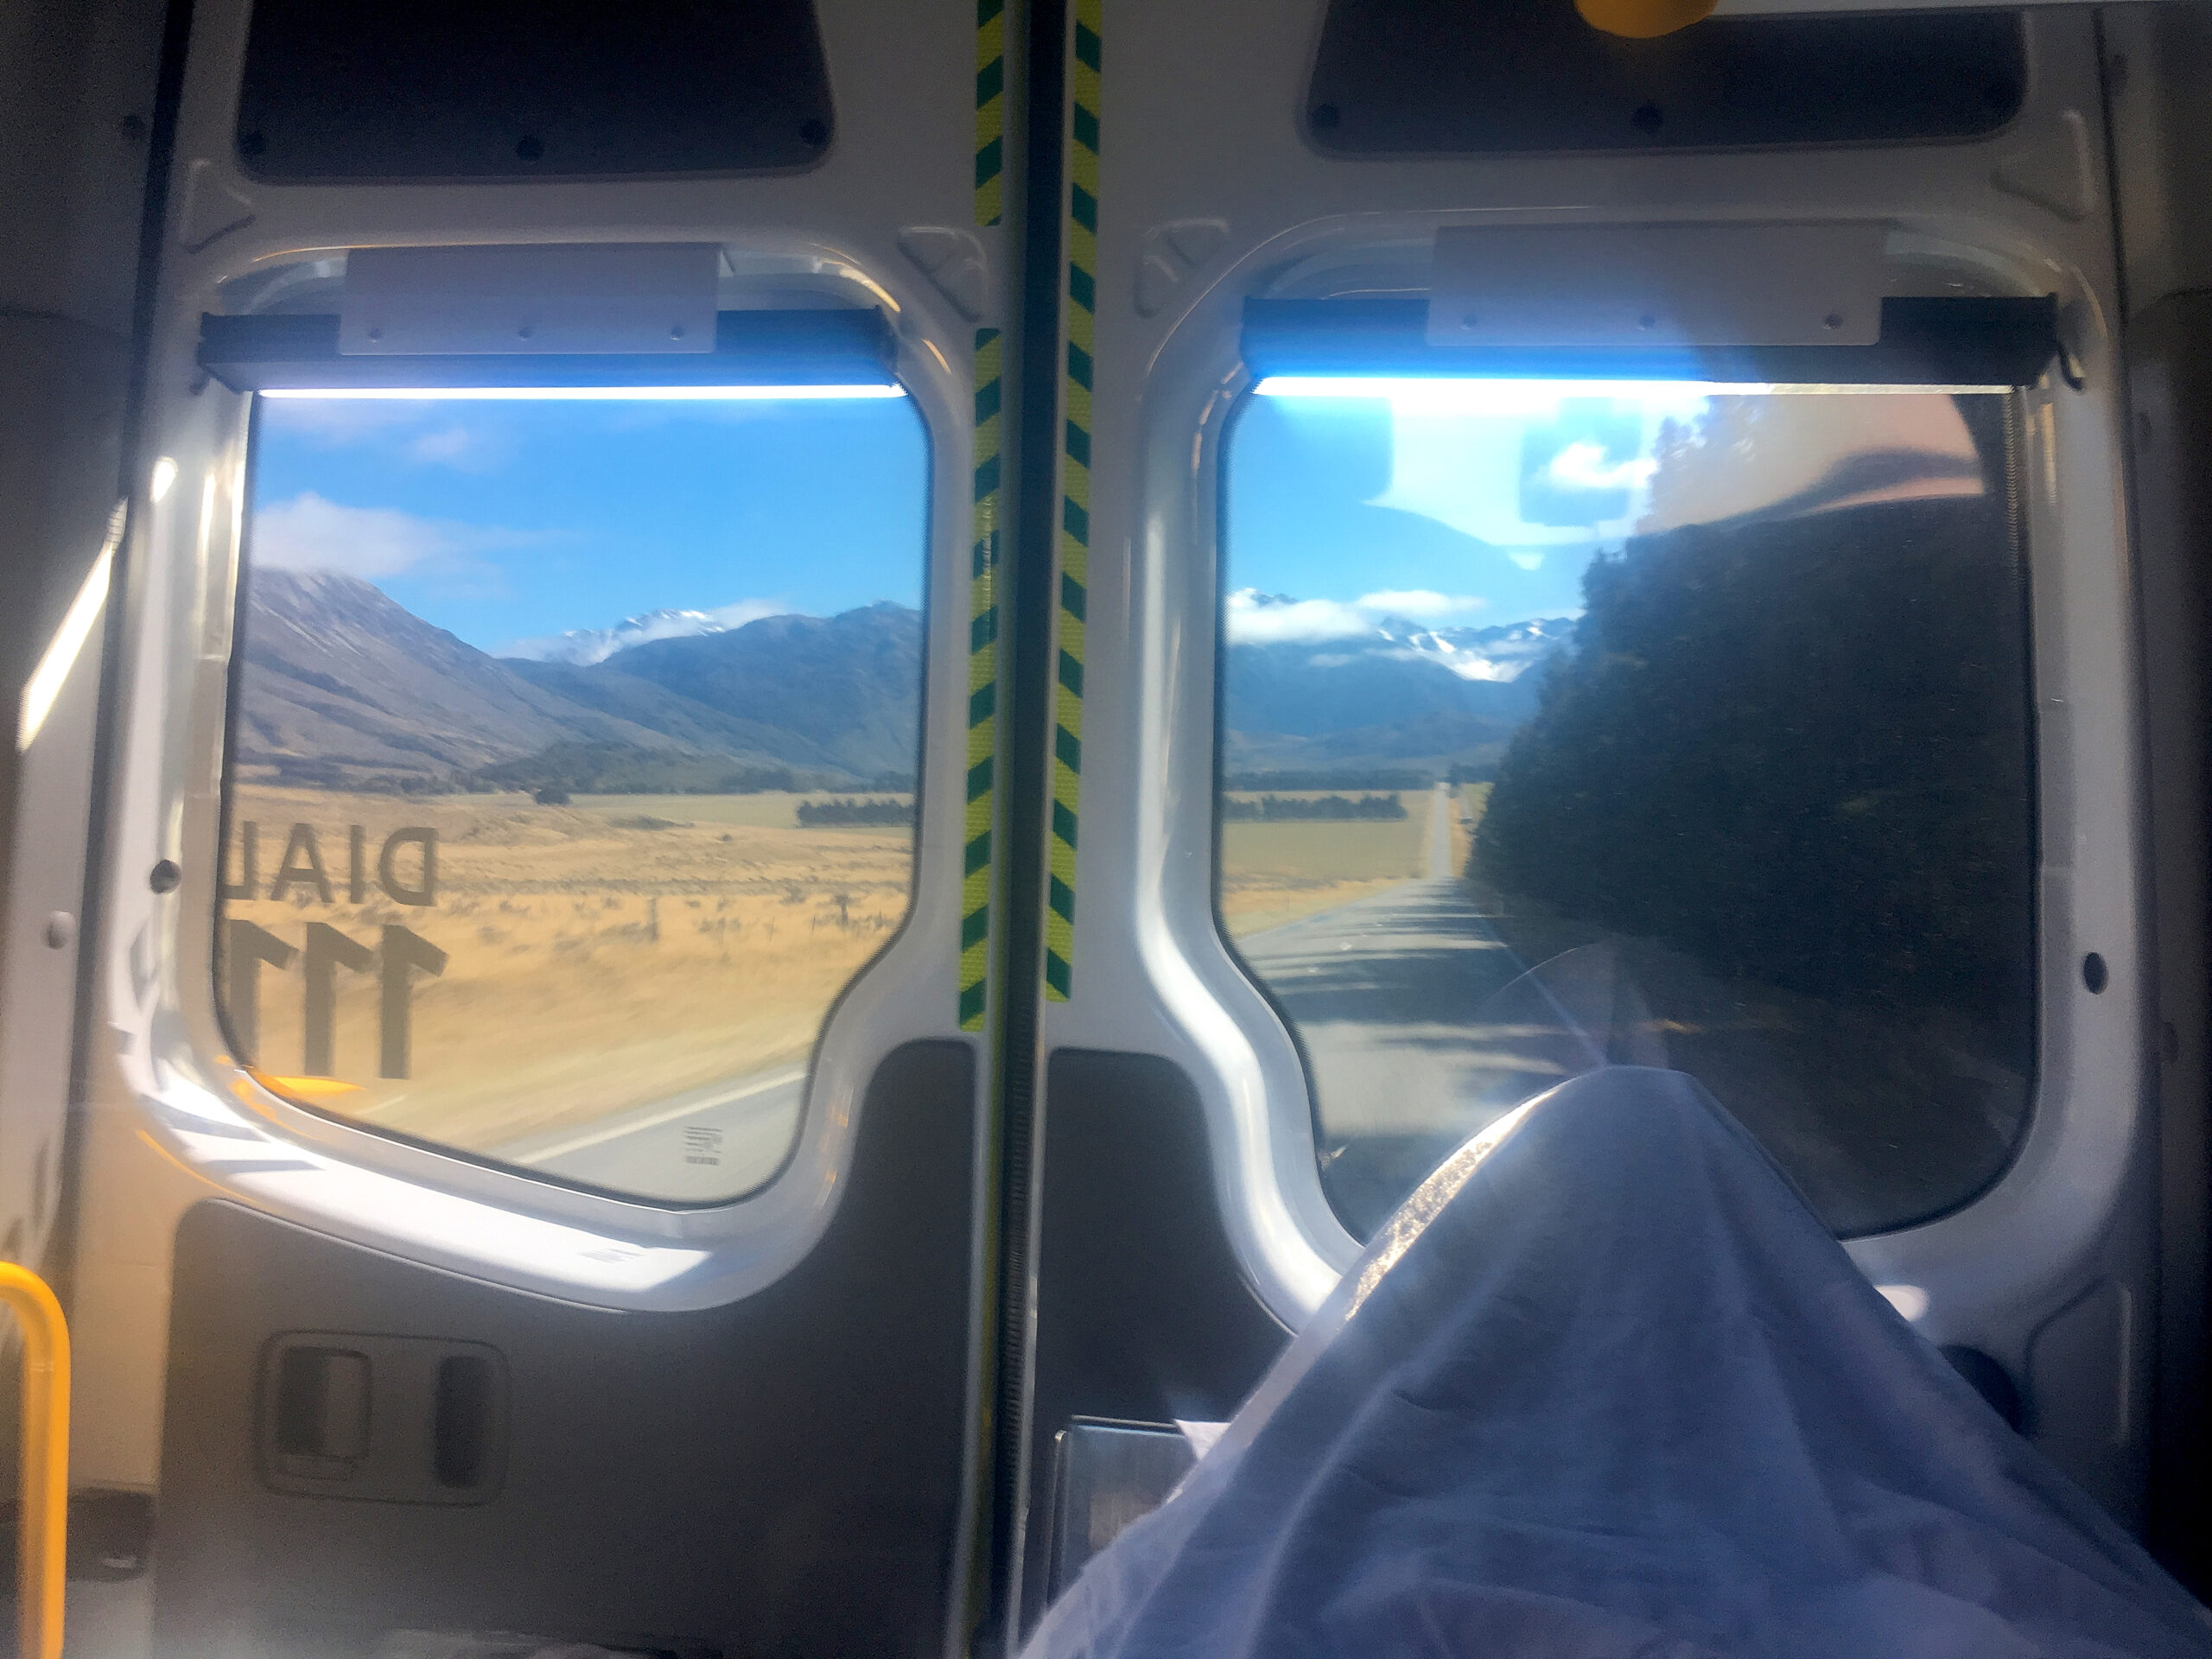 The view of New Zealand's Lewis Pass Road from the back of an ambulance is dazzling.